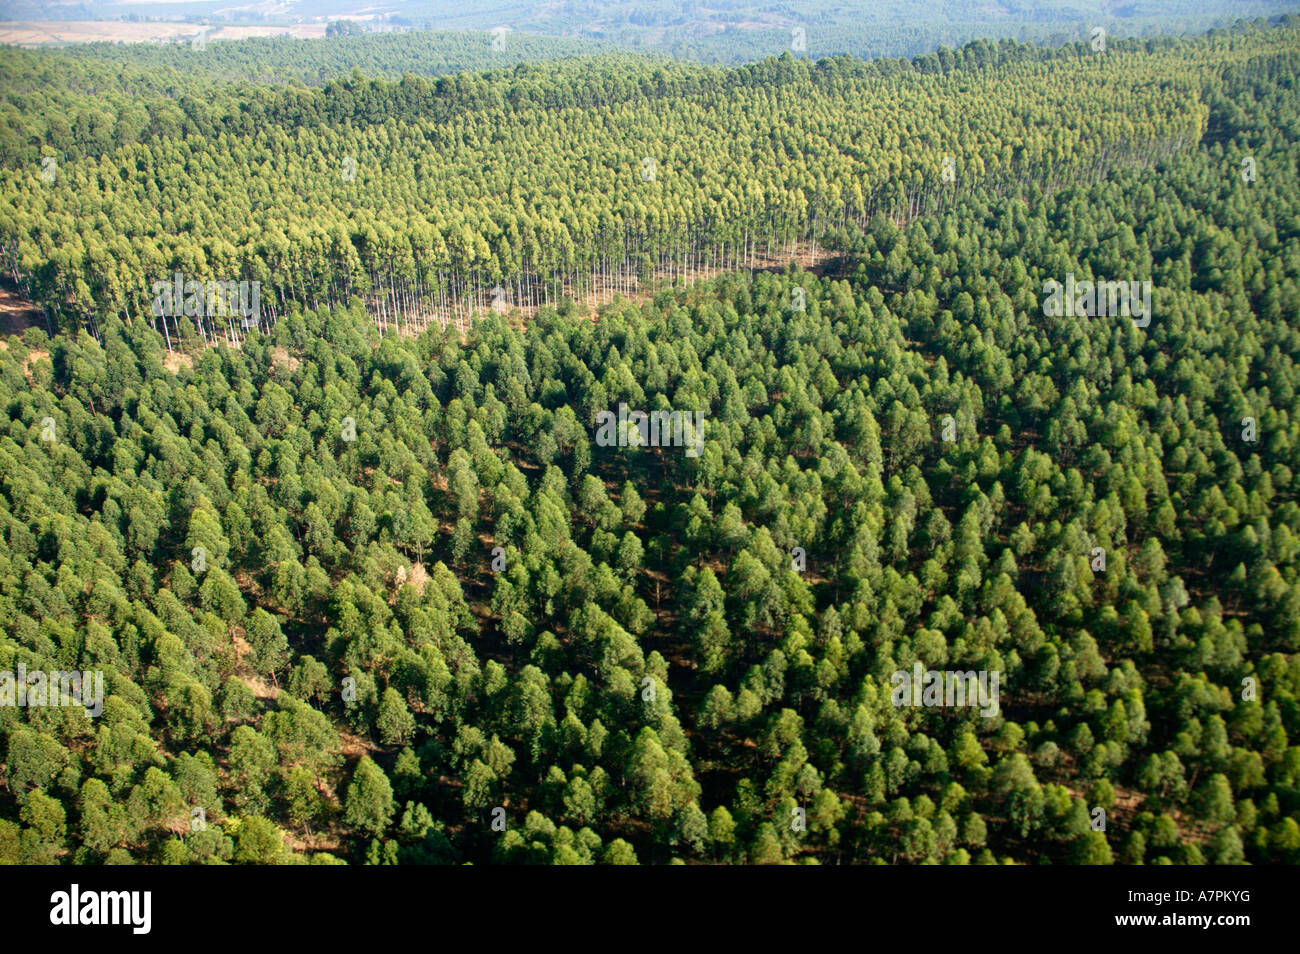 Aerial view of eucalyptus grandis or saligna trees in a commercial forestry plantation in South Africa Mpumalanga South Africa Stock Photo